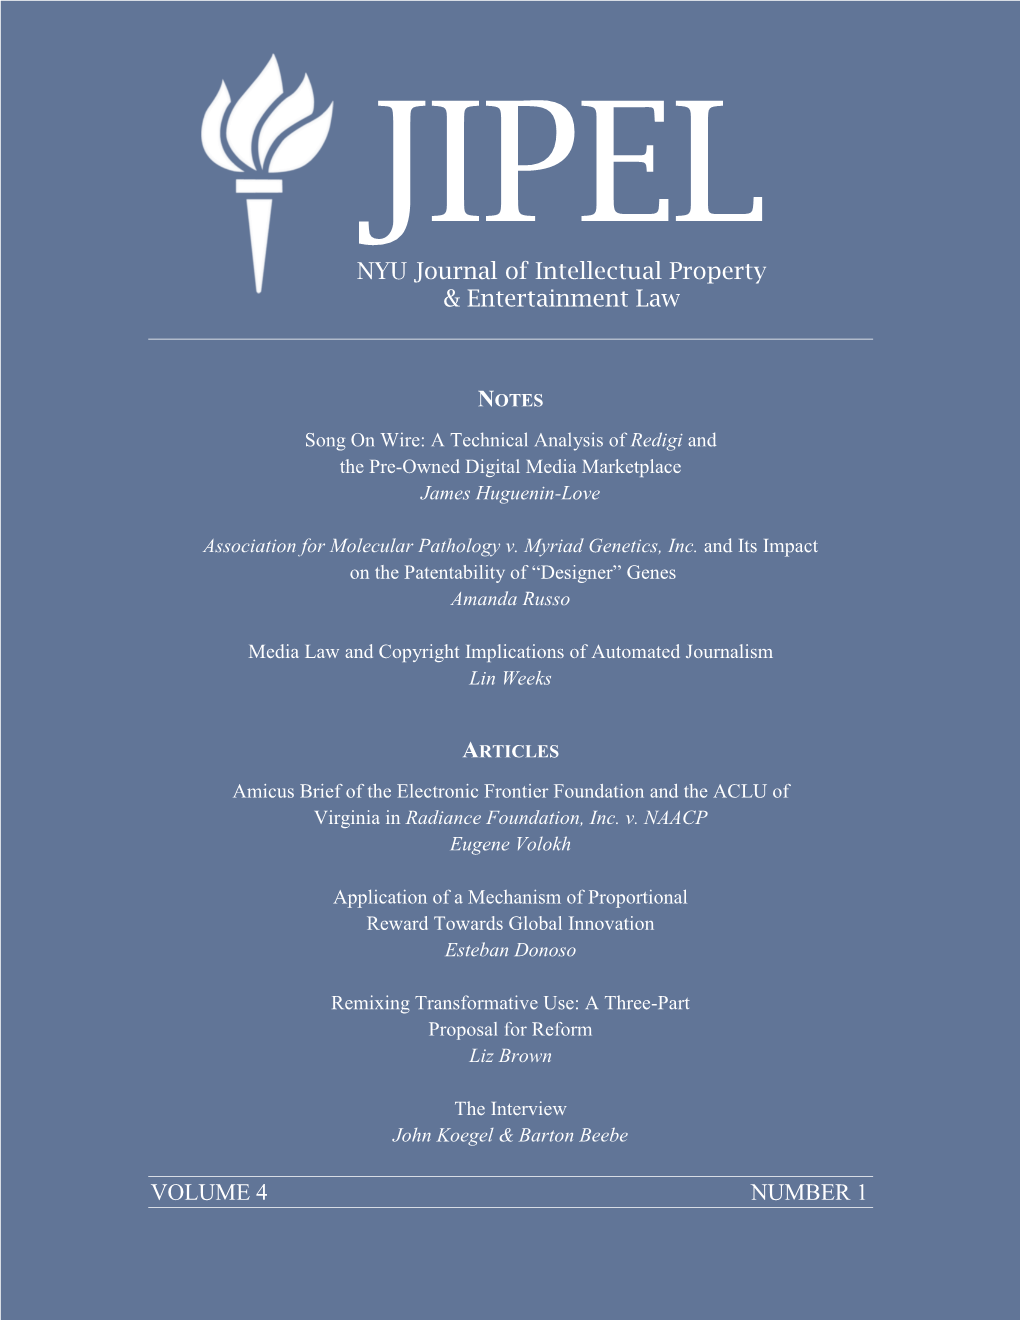 VOLUME 4 NUMBER 1 NYU Journal of Intellectual Property